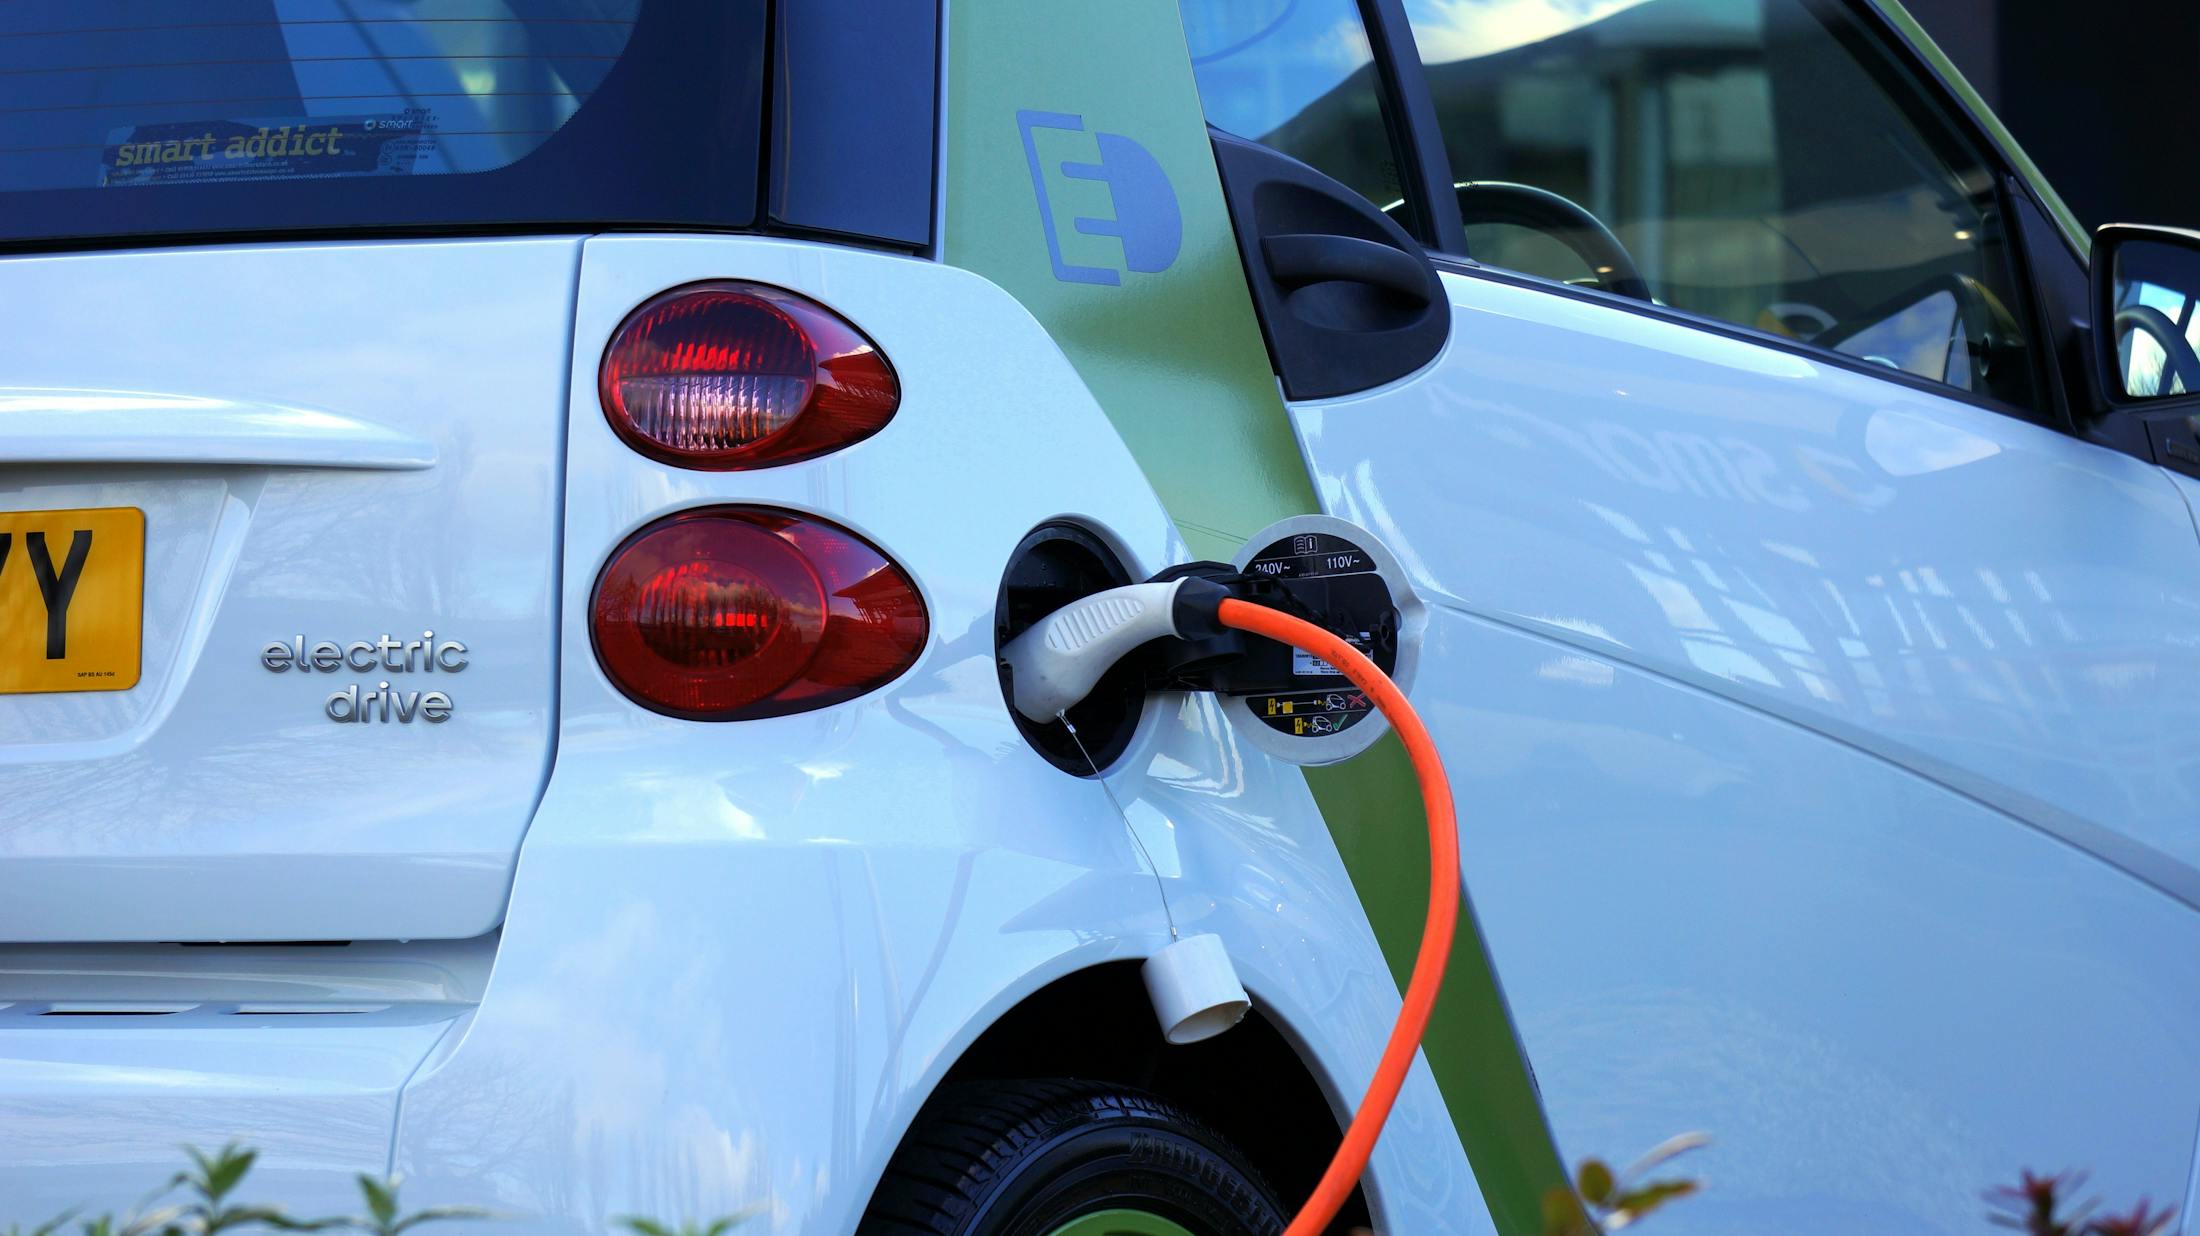 Electric vehicle sales promise shock for Big Oil News EcoBusiness